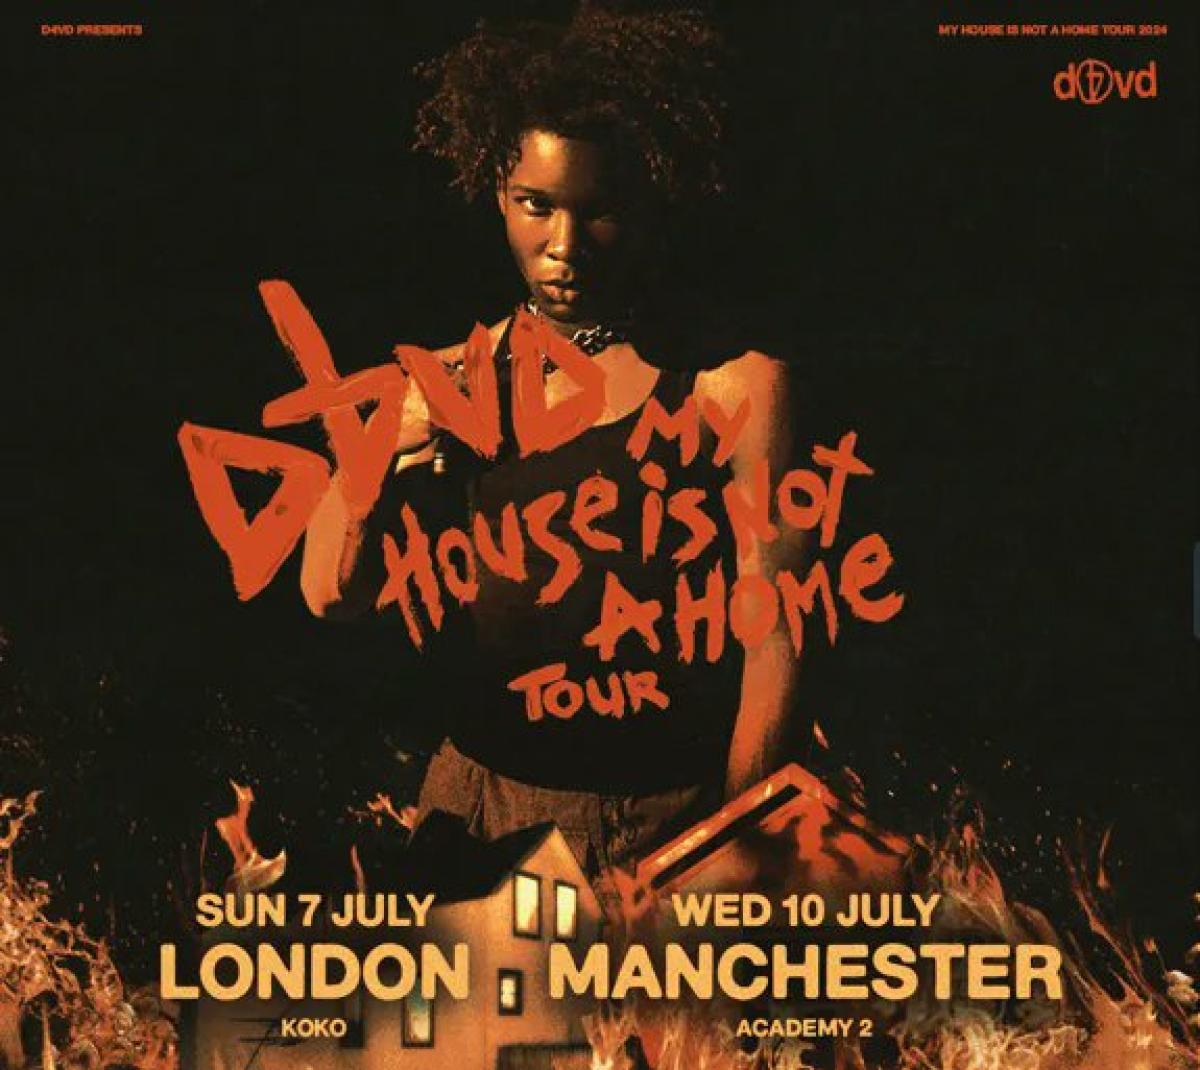 D4vd - My House Is Not A Home Tour at KOKO Tickets